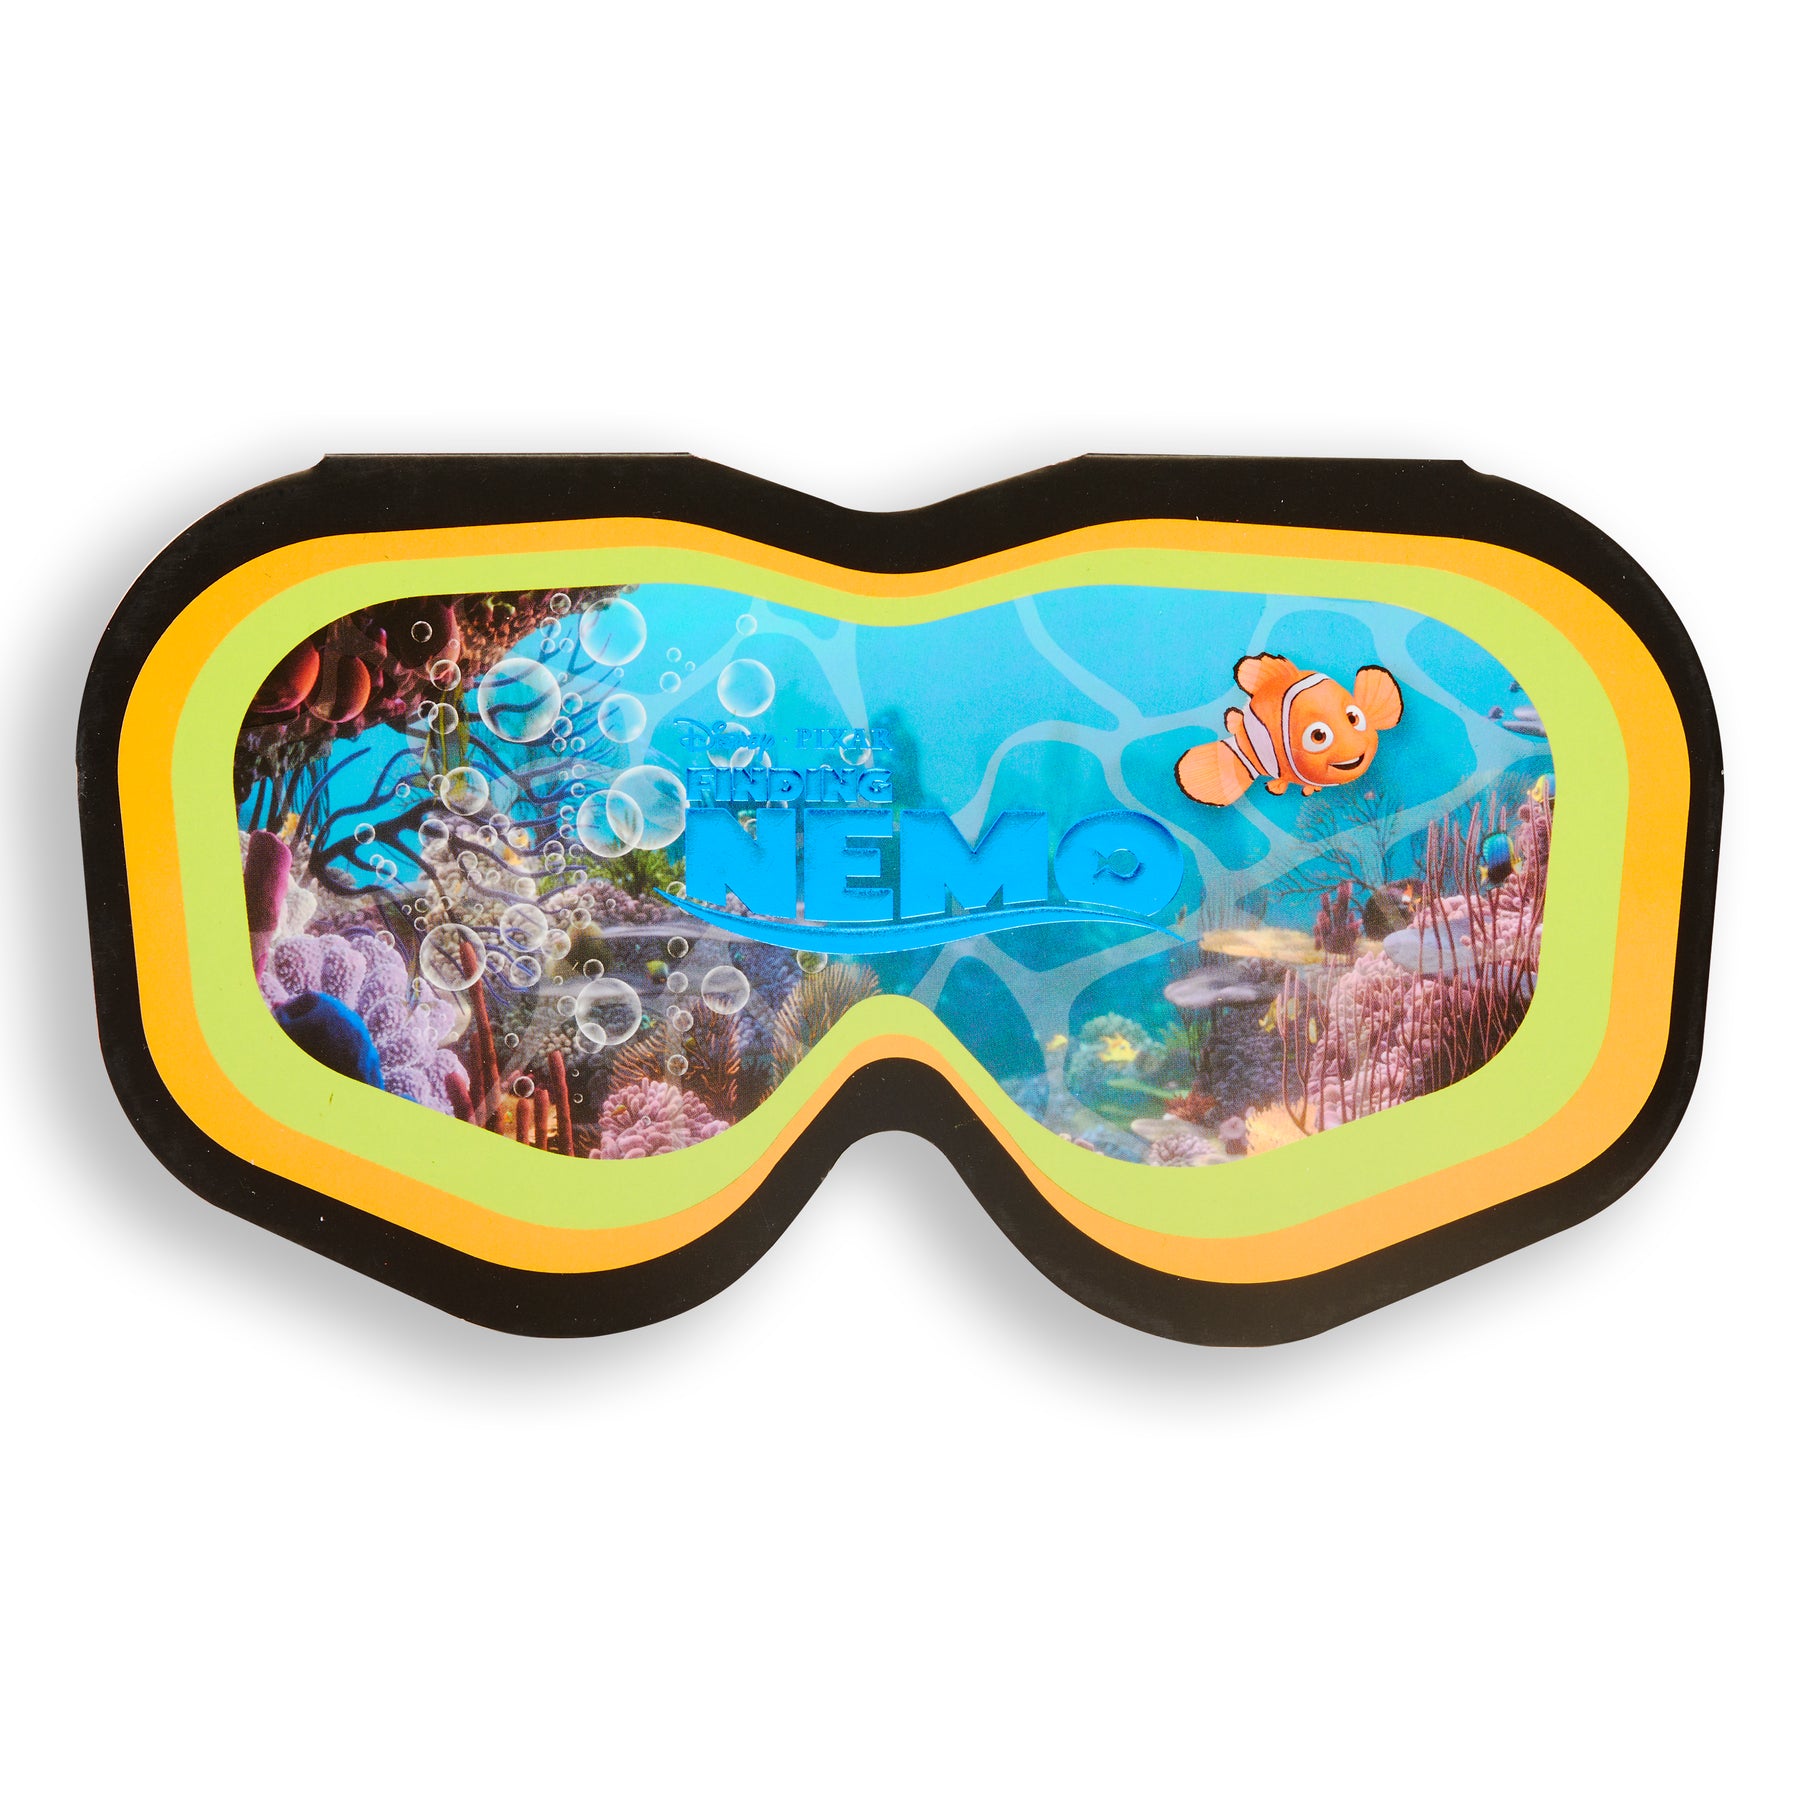 DISNEY & PIXAR’S FINDING NEMO AND REVOLUTION P. SHERMAN SHADOW PALETTE - OUTLET